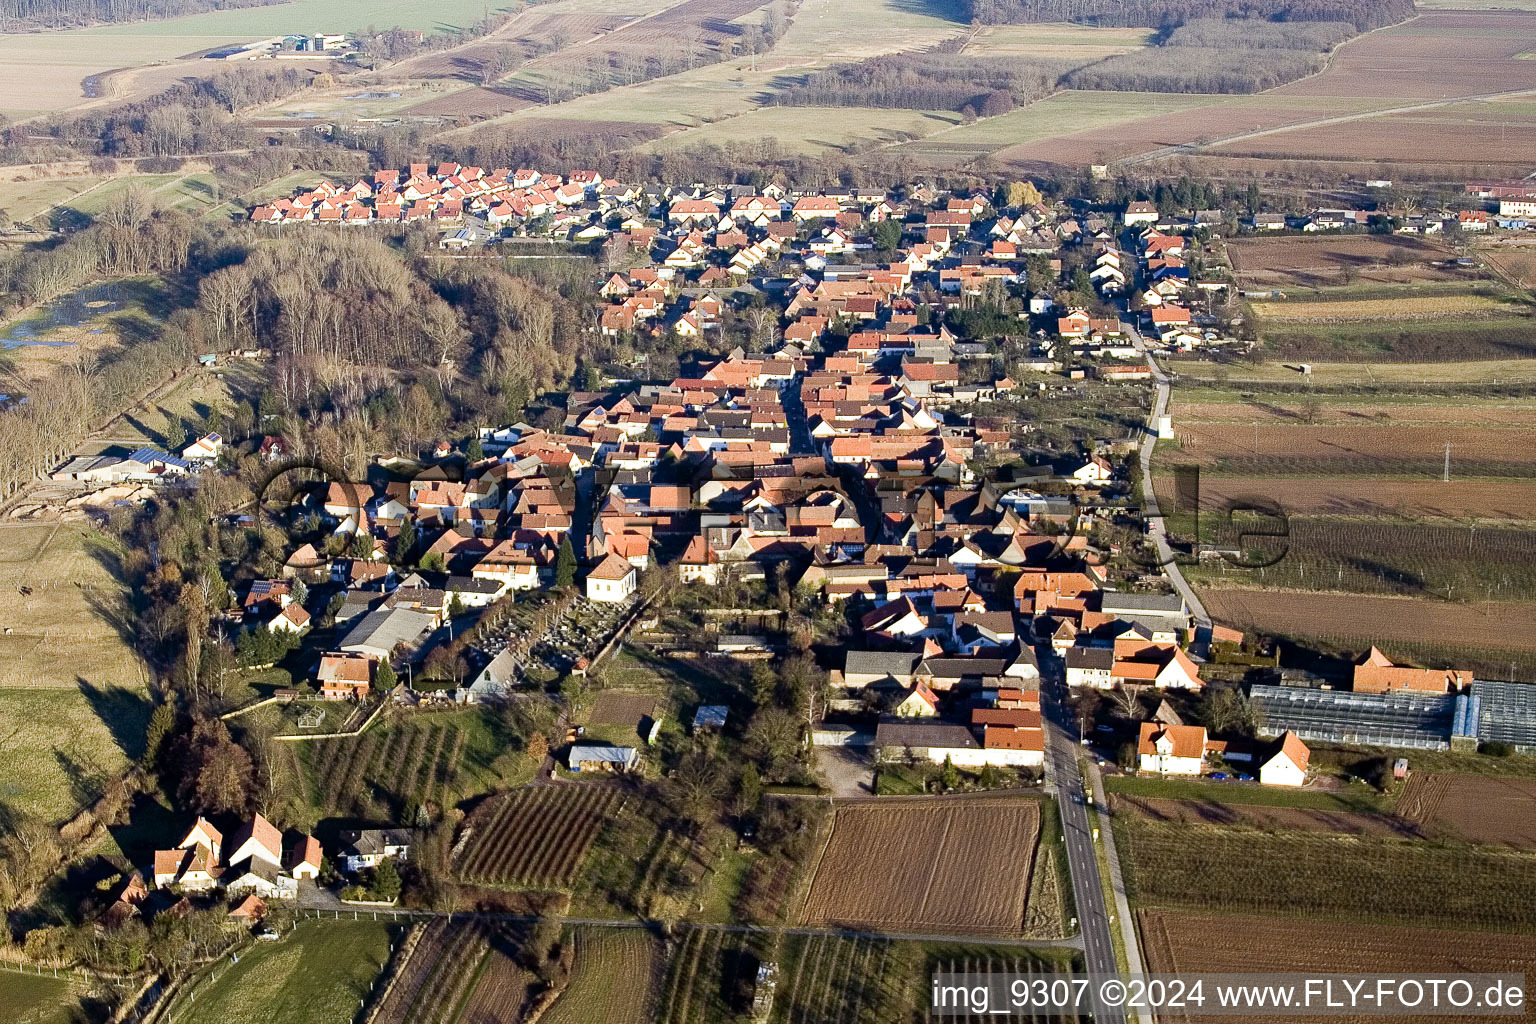 Village - view on the edge of agricultural fields and farmland in the district Gewerbegebiet Horst in Winden in the state Rhineland-Palatinate